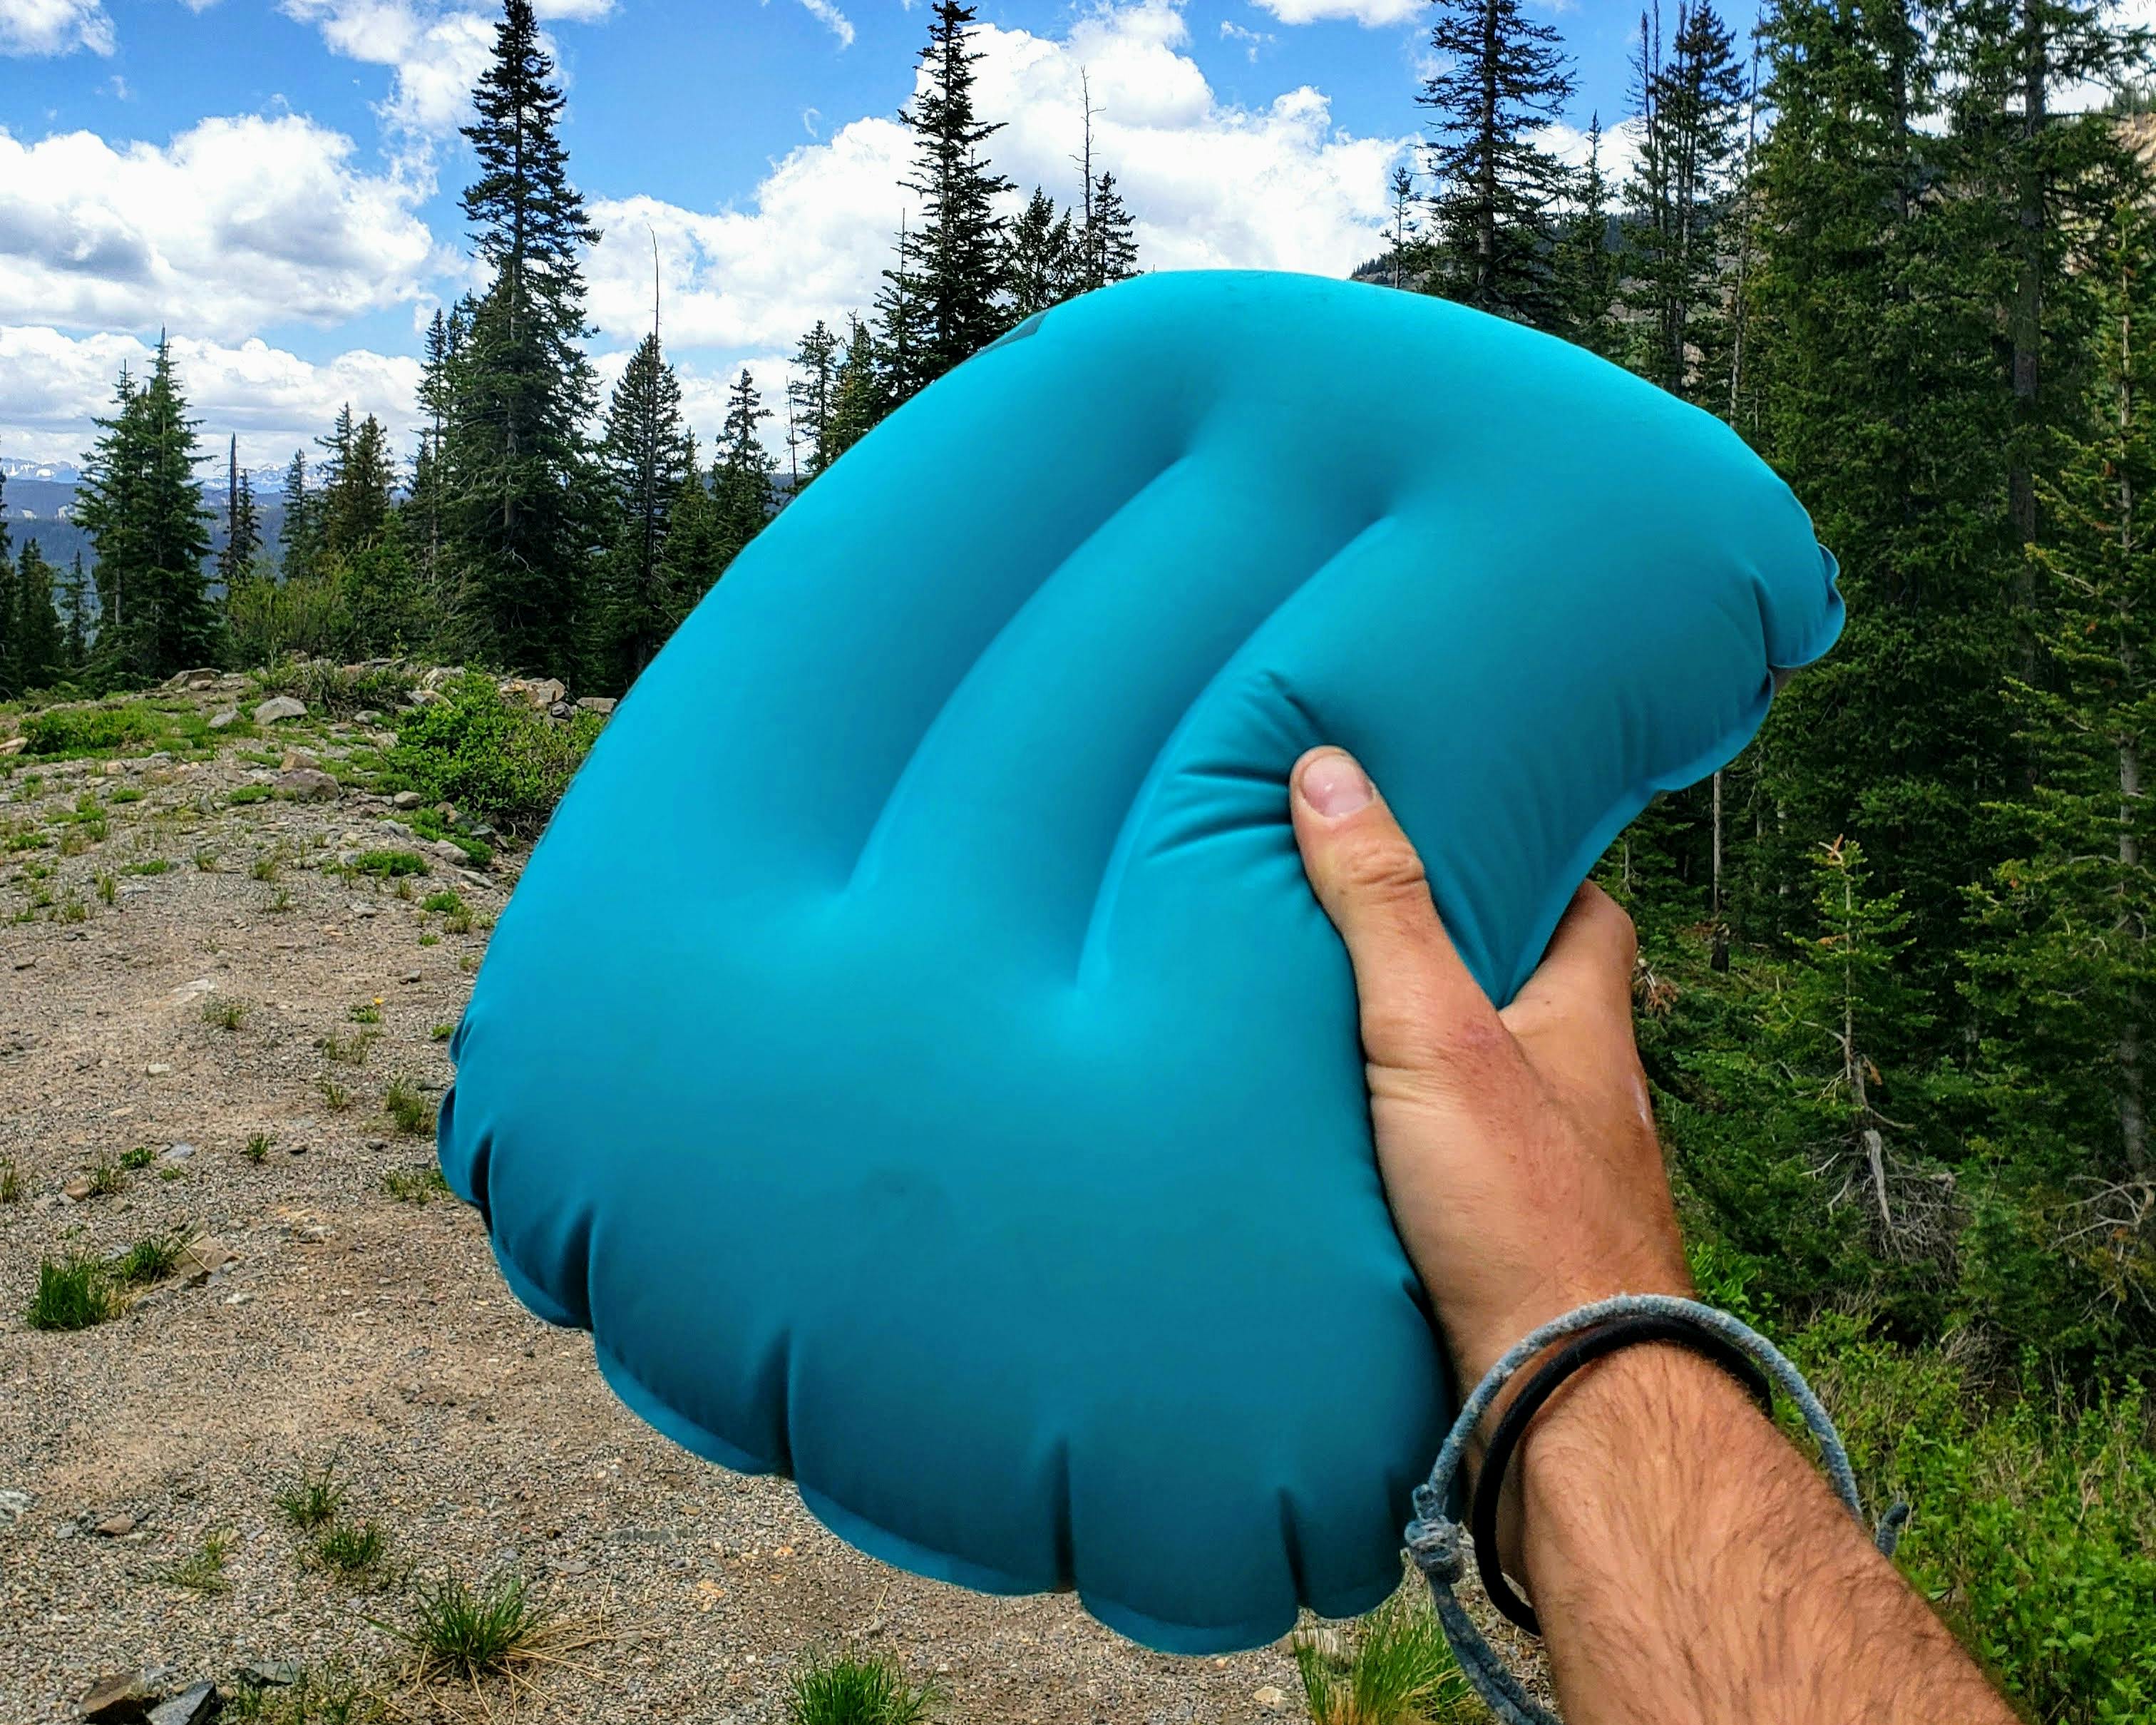 The author holding an inflatable camping pillow up against the forest backdrop.